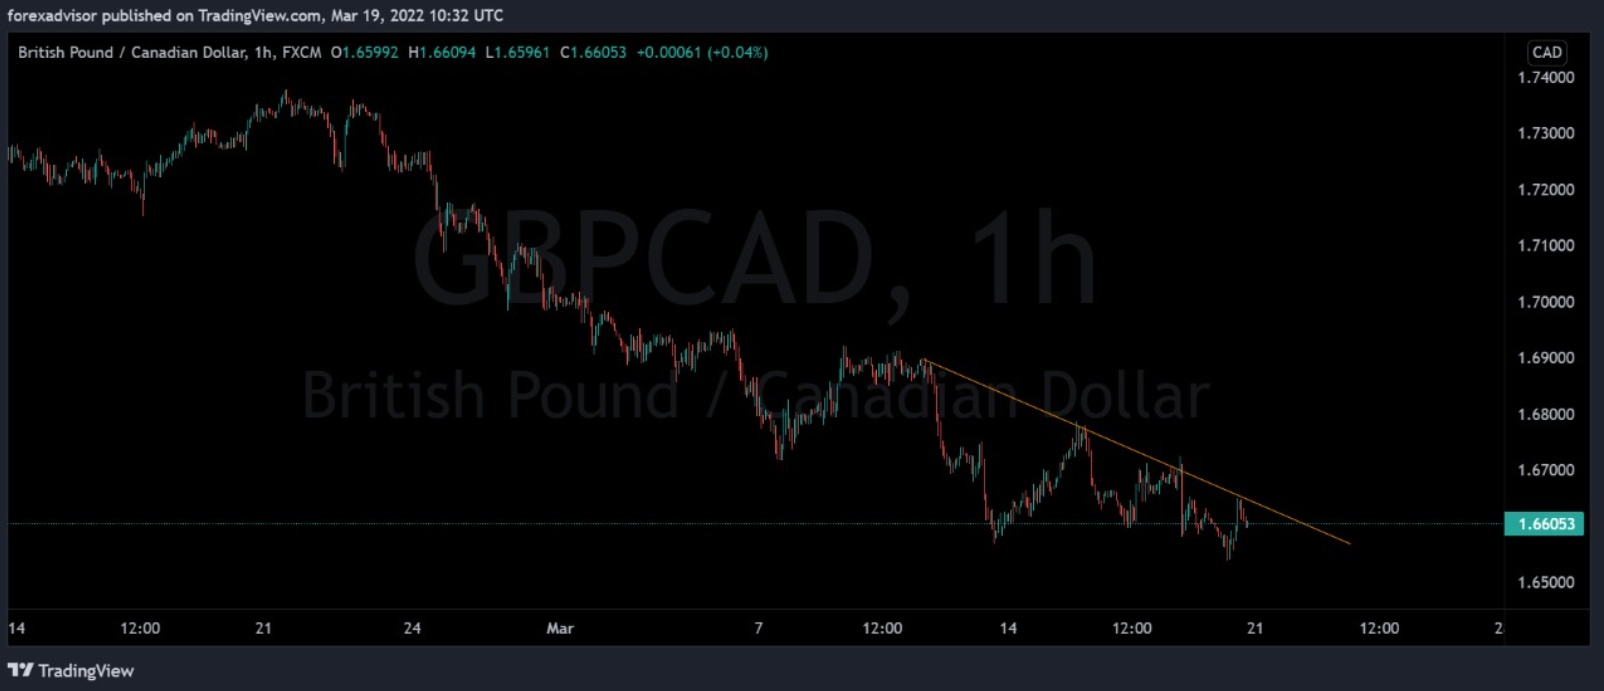 GBP/CAD News and Forecast of the week 